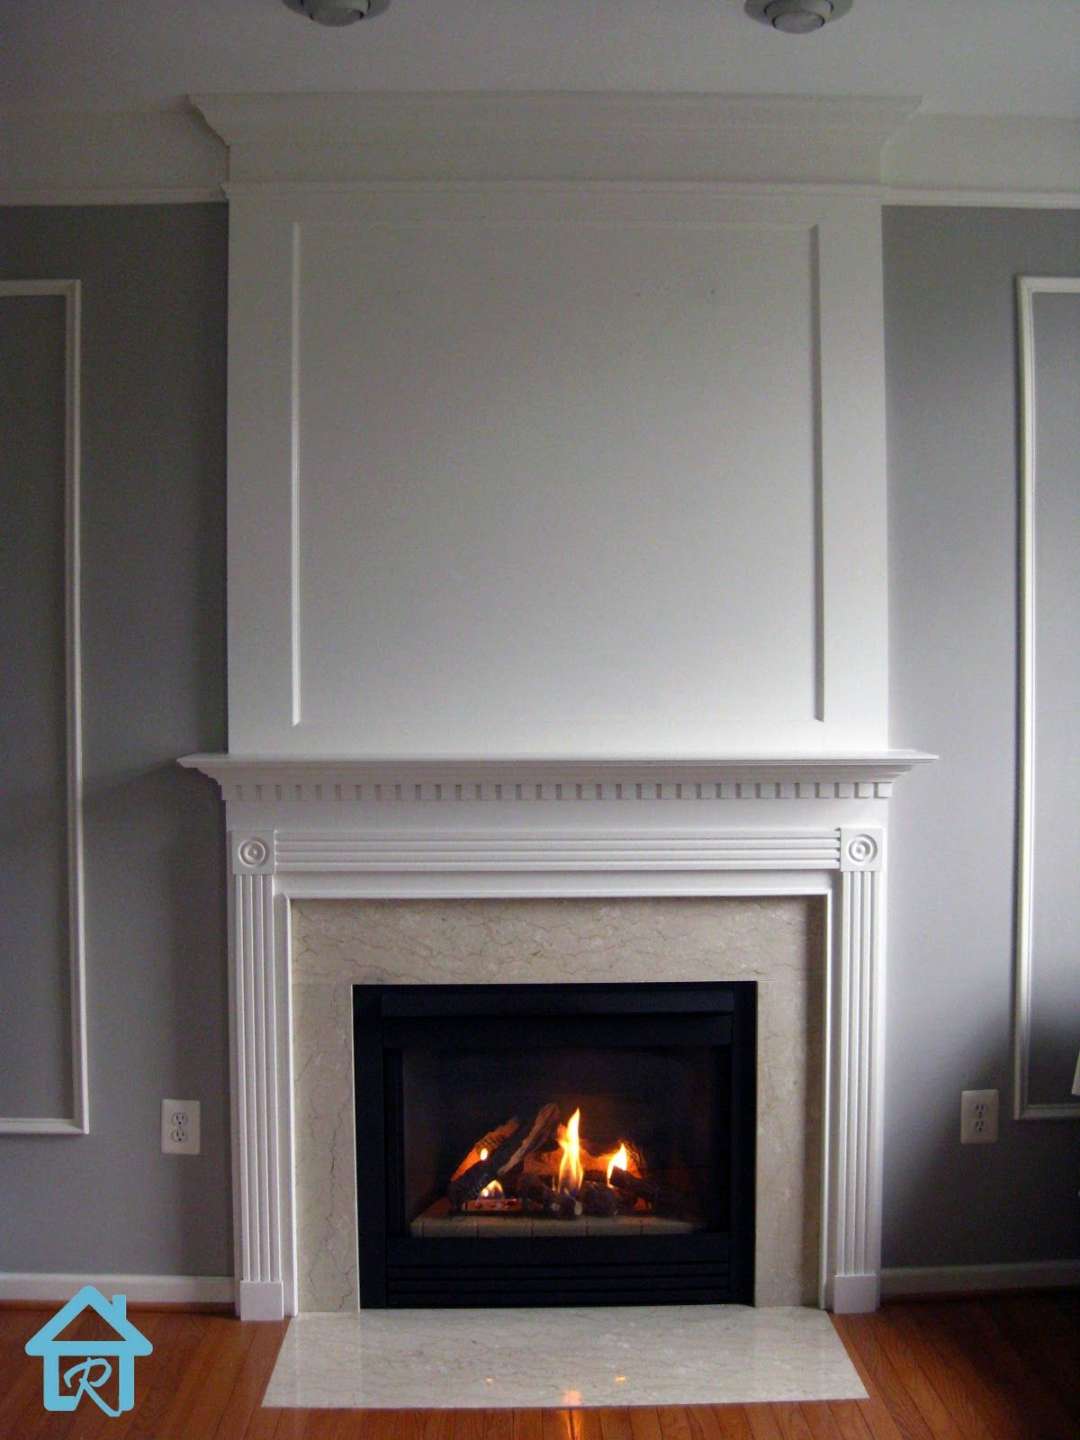 Fireplace Molding Ideas: Adding Visual Interest and Height